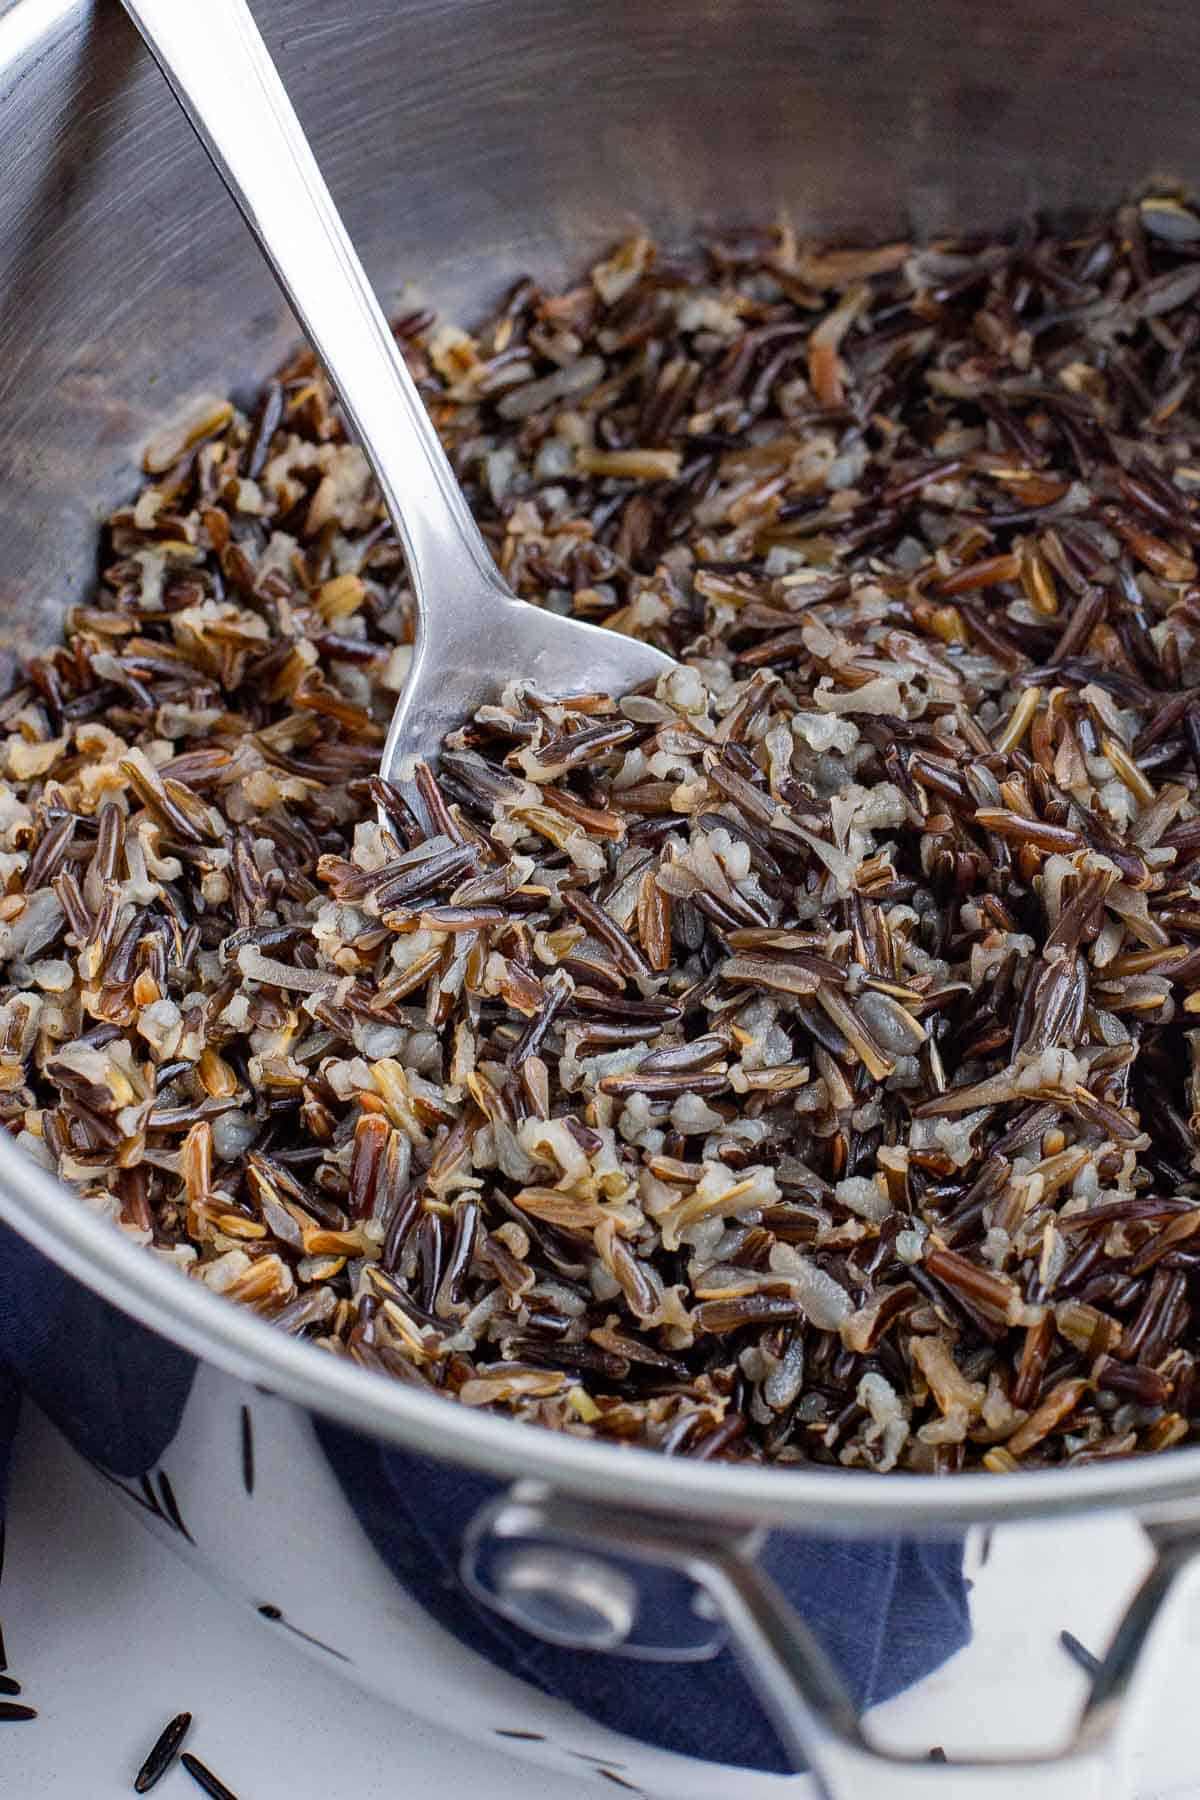 A spoon scoops some wild rice out of a saucepan on the stove.